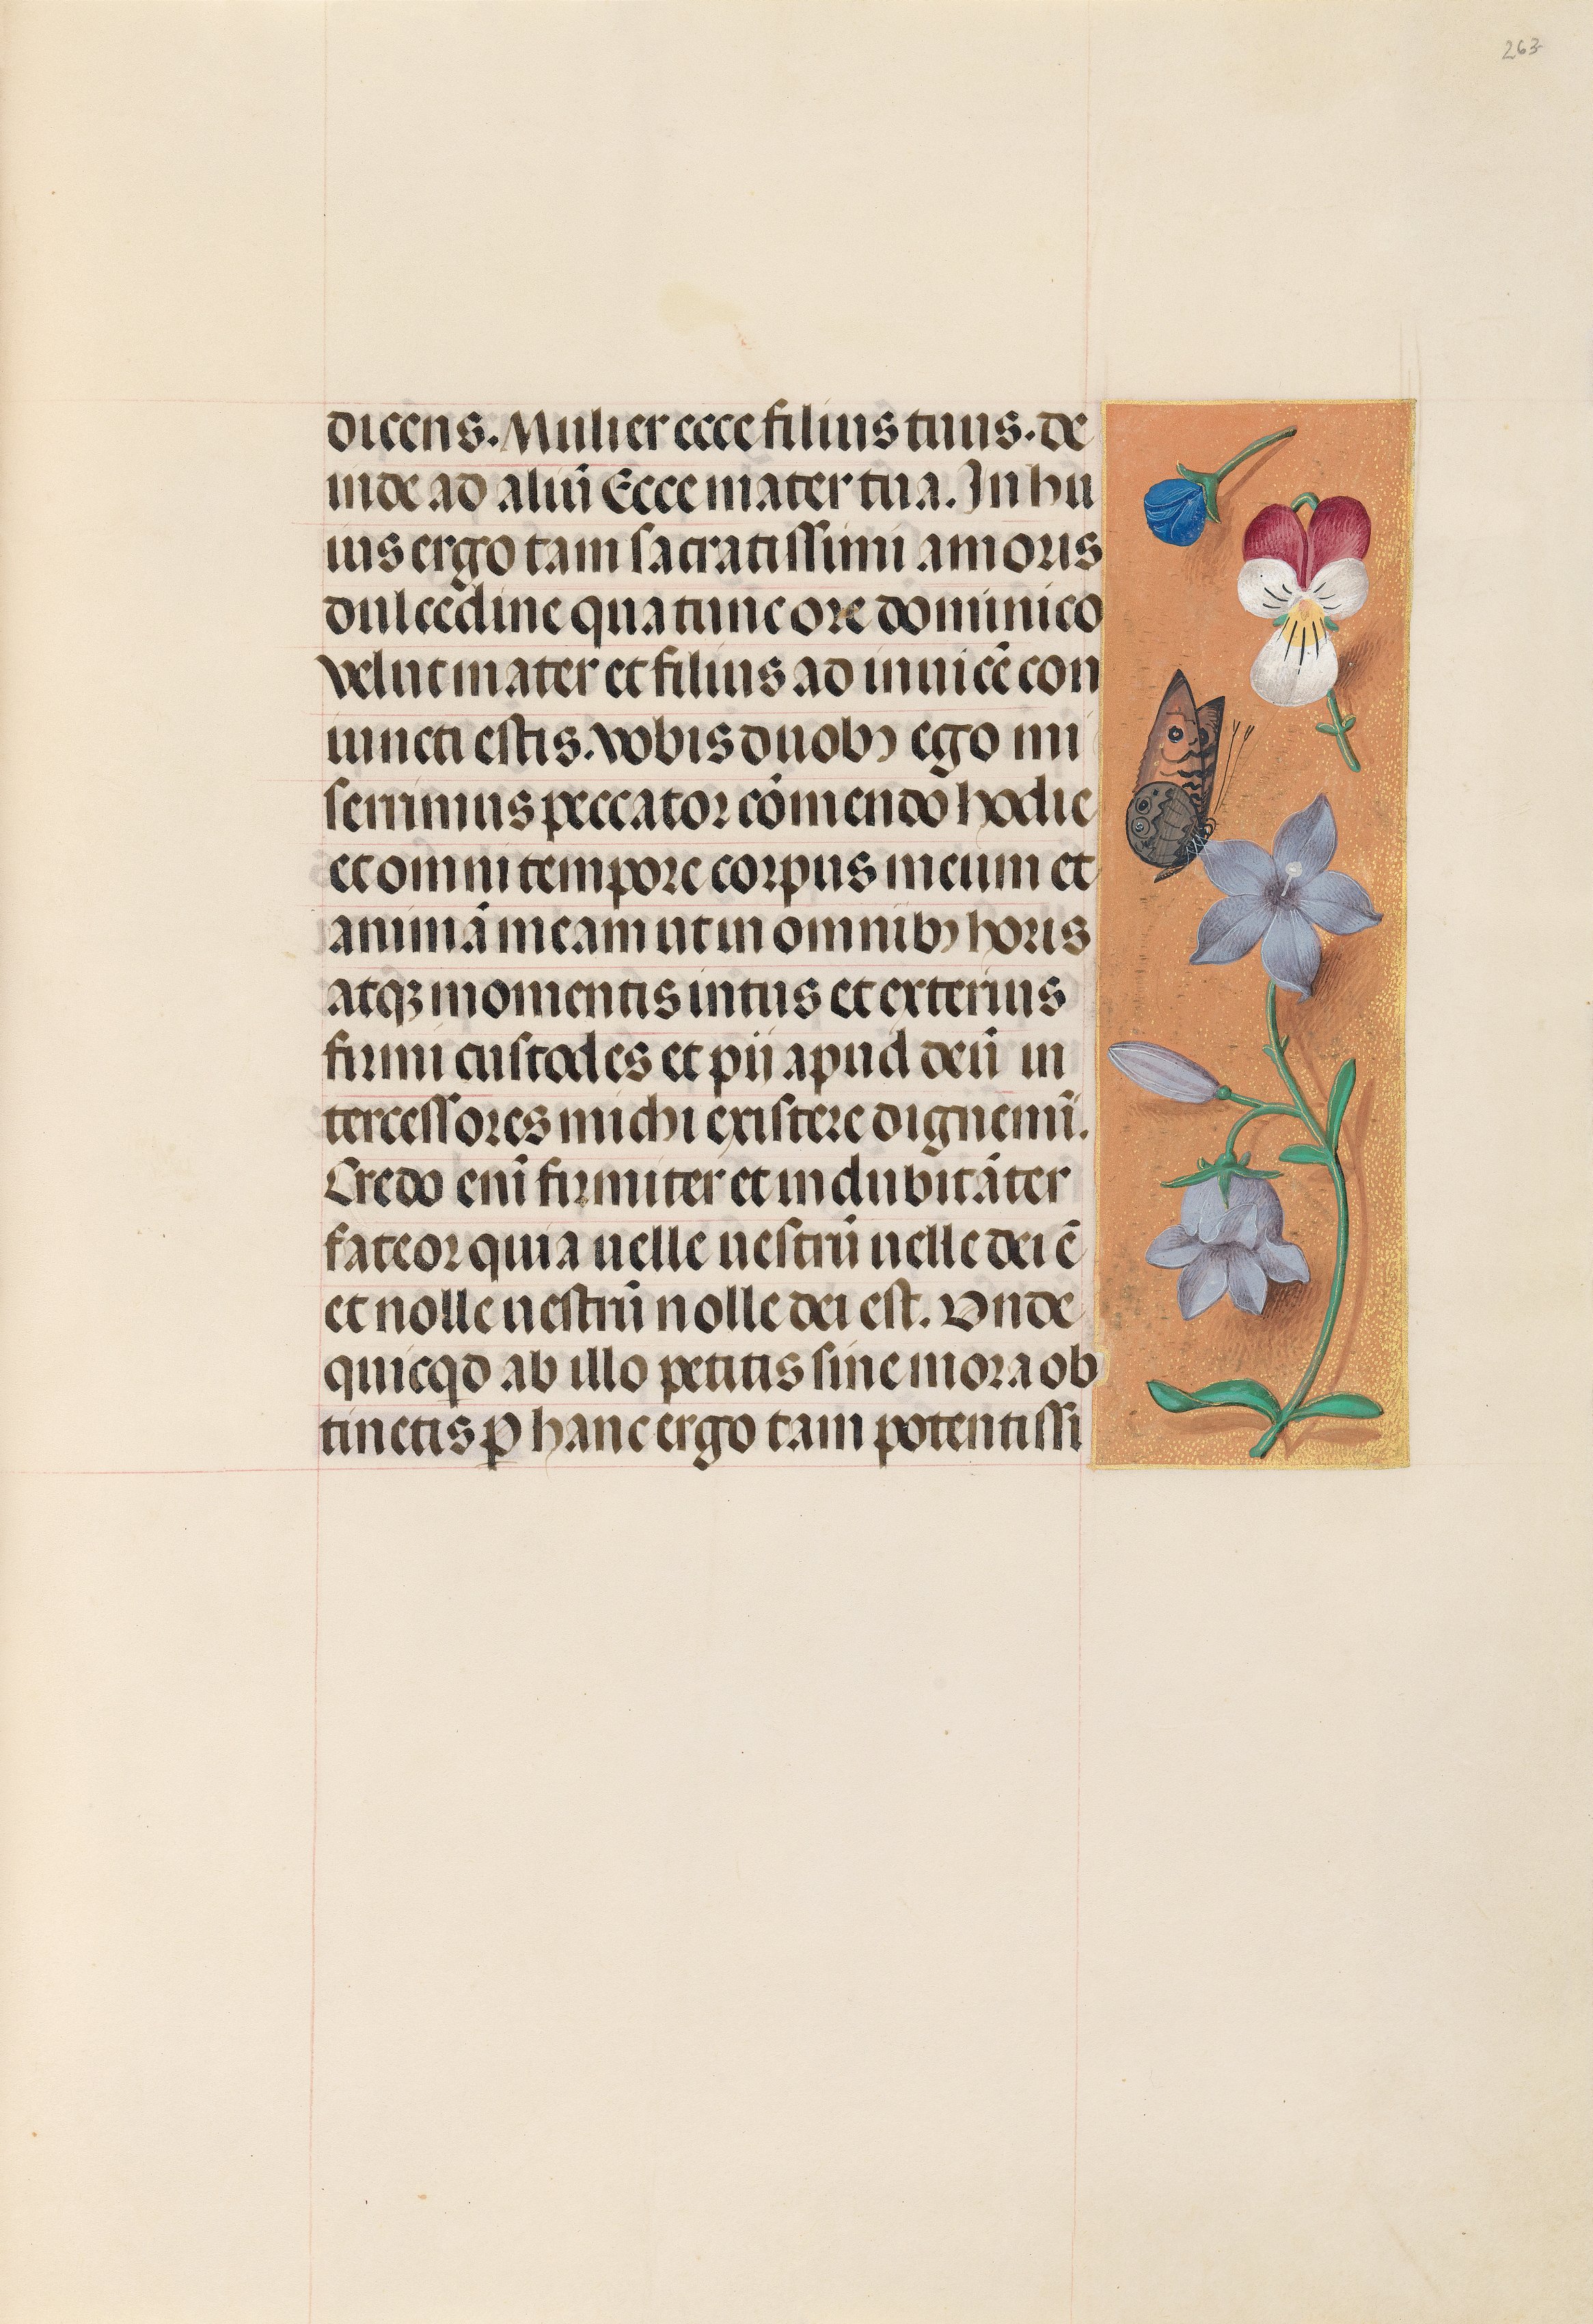 Hours of Queen Isabella the Catholic, Queen of Spain:  Fol. 263r